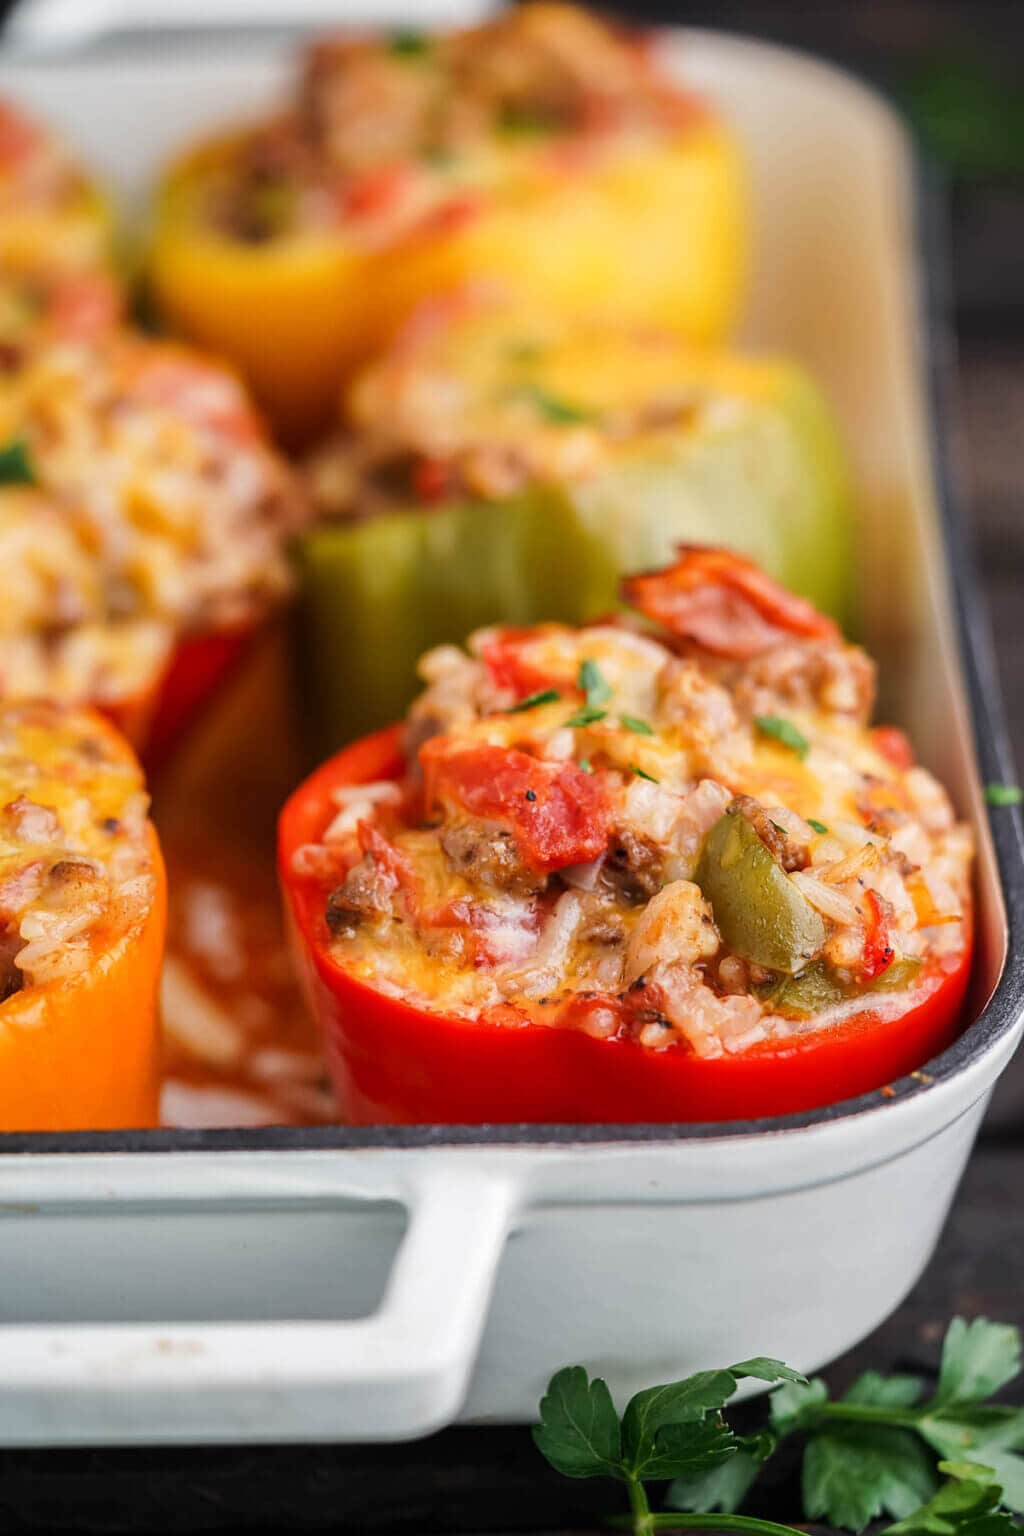 classic-old-fashioned-stuffed-bell-peppers-recipe-bowl-me-over